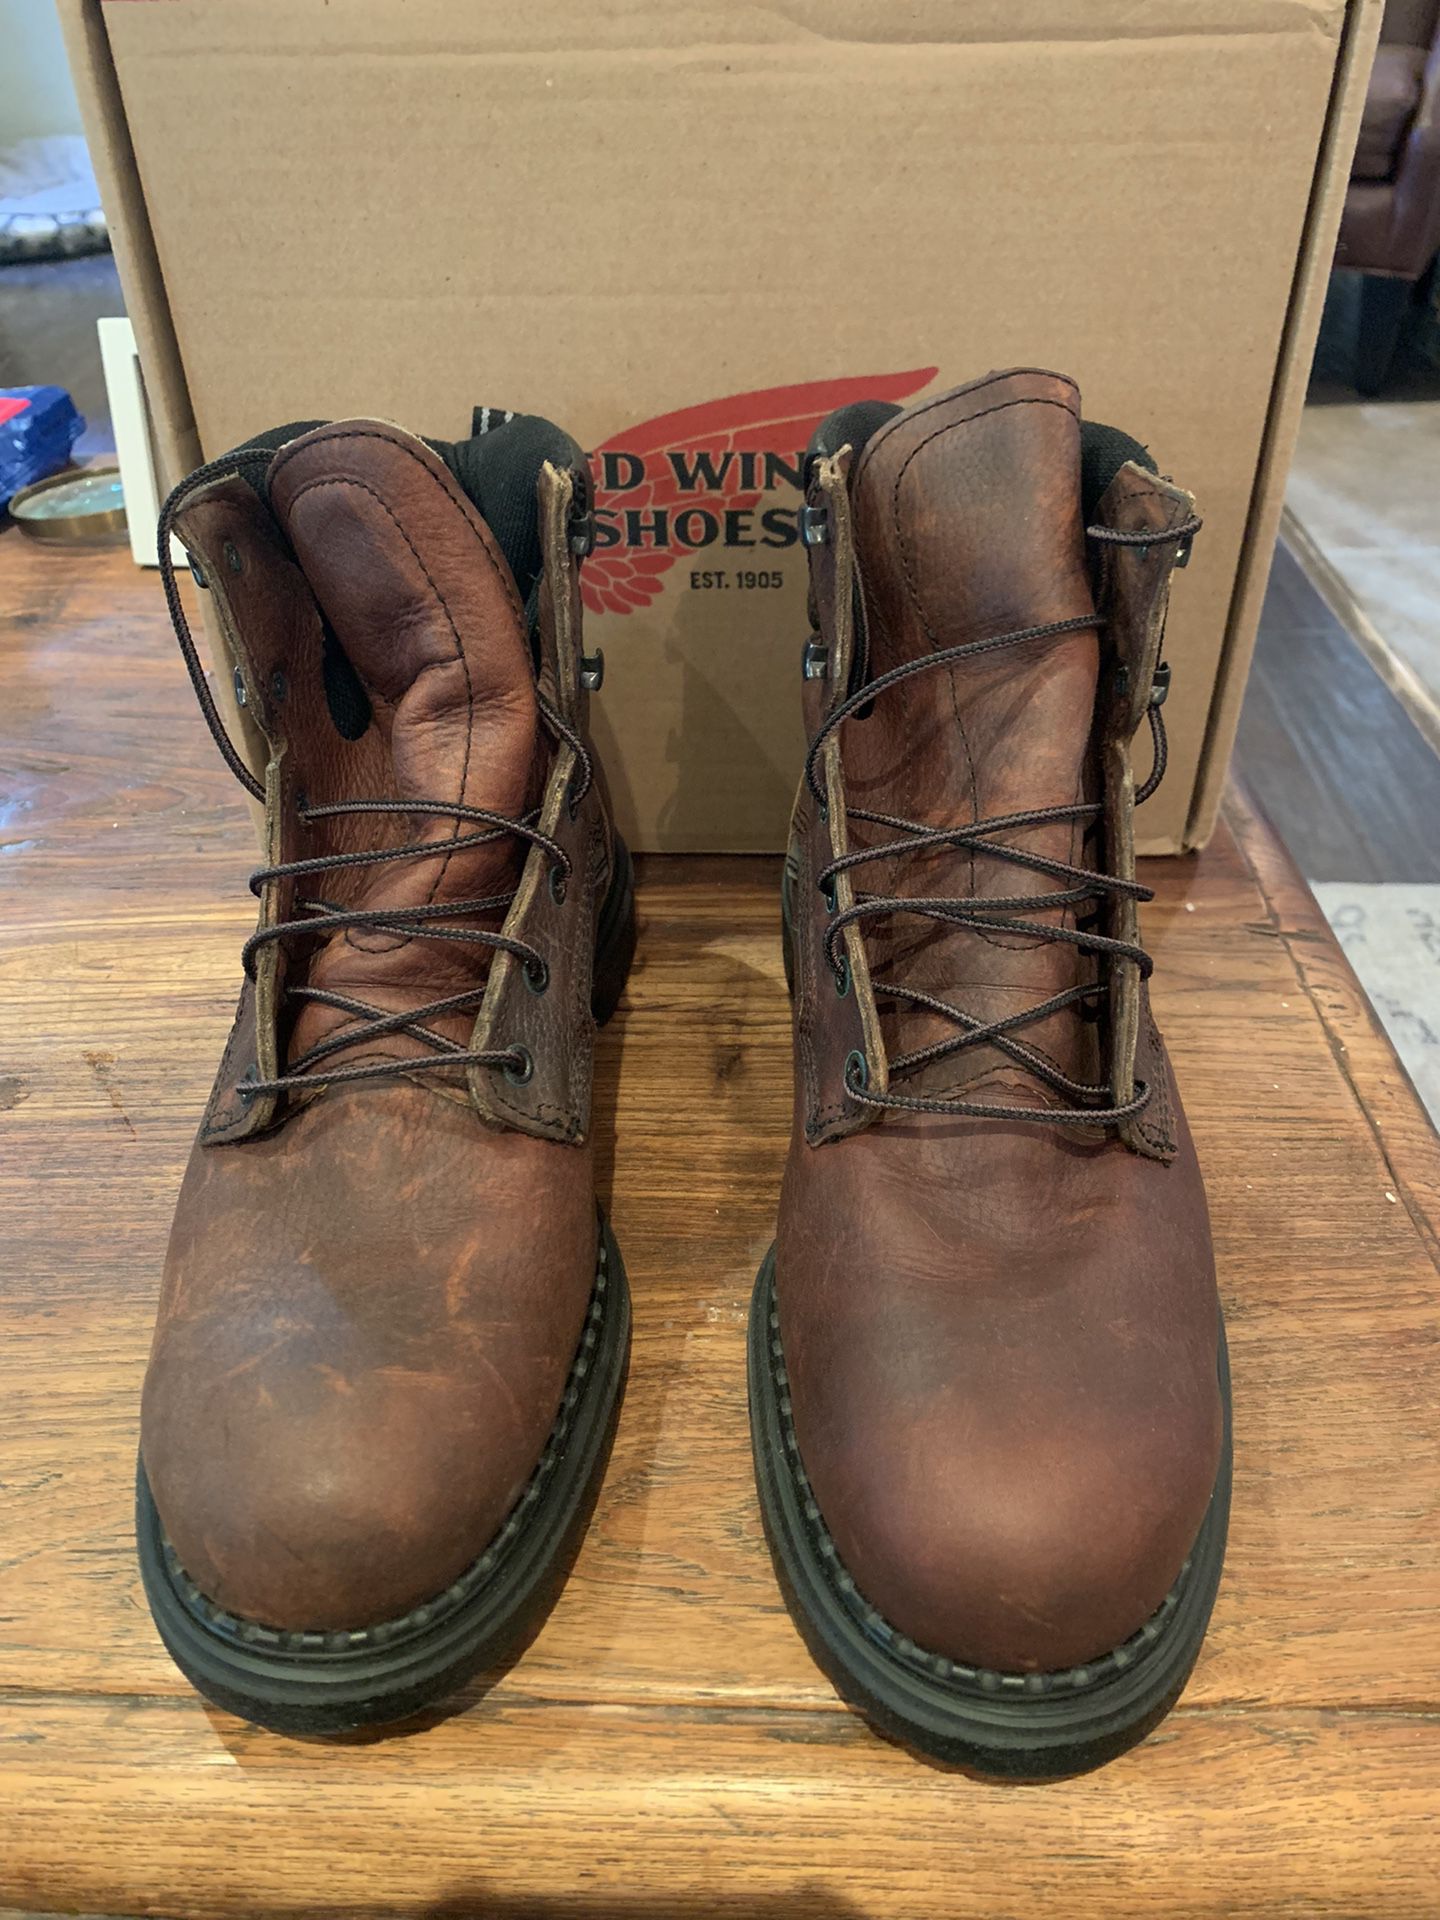 New Red Wing Dynaforce 6” Boots